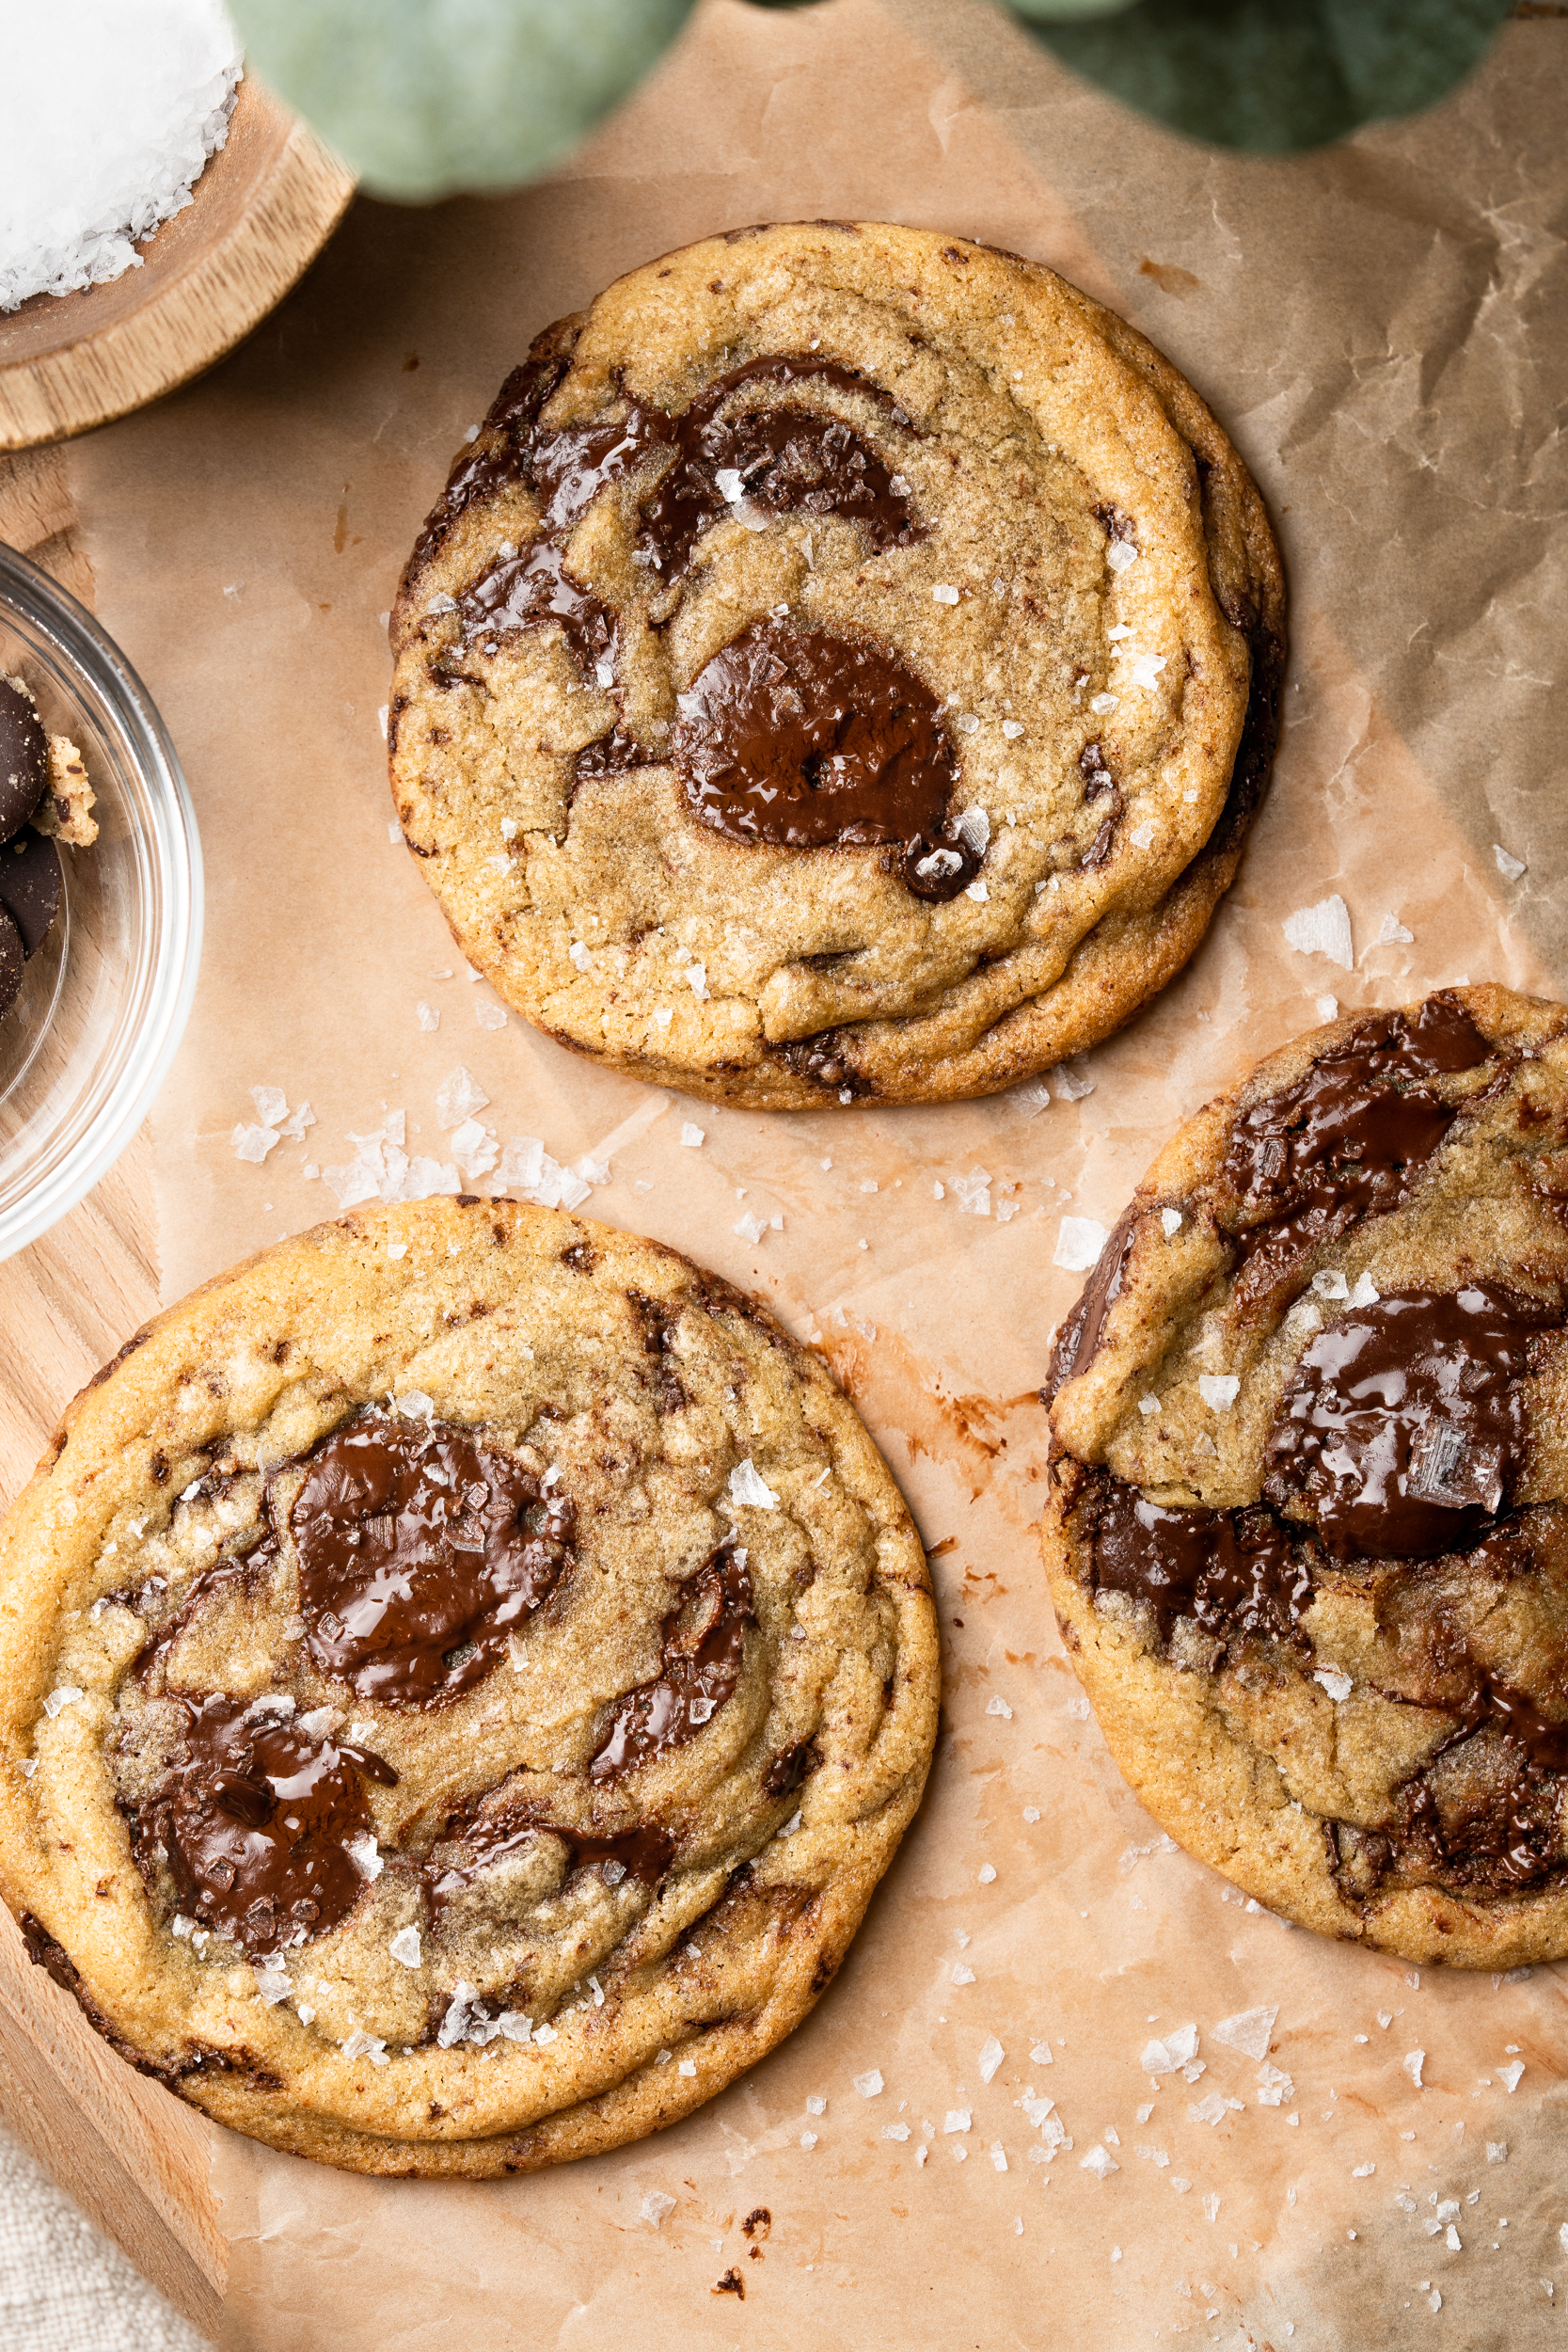 https://chasingcravings.com/wp-content/uploads/2023/03/Chocolate-Chip-Cookie-FINAL.jpg